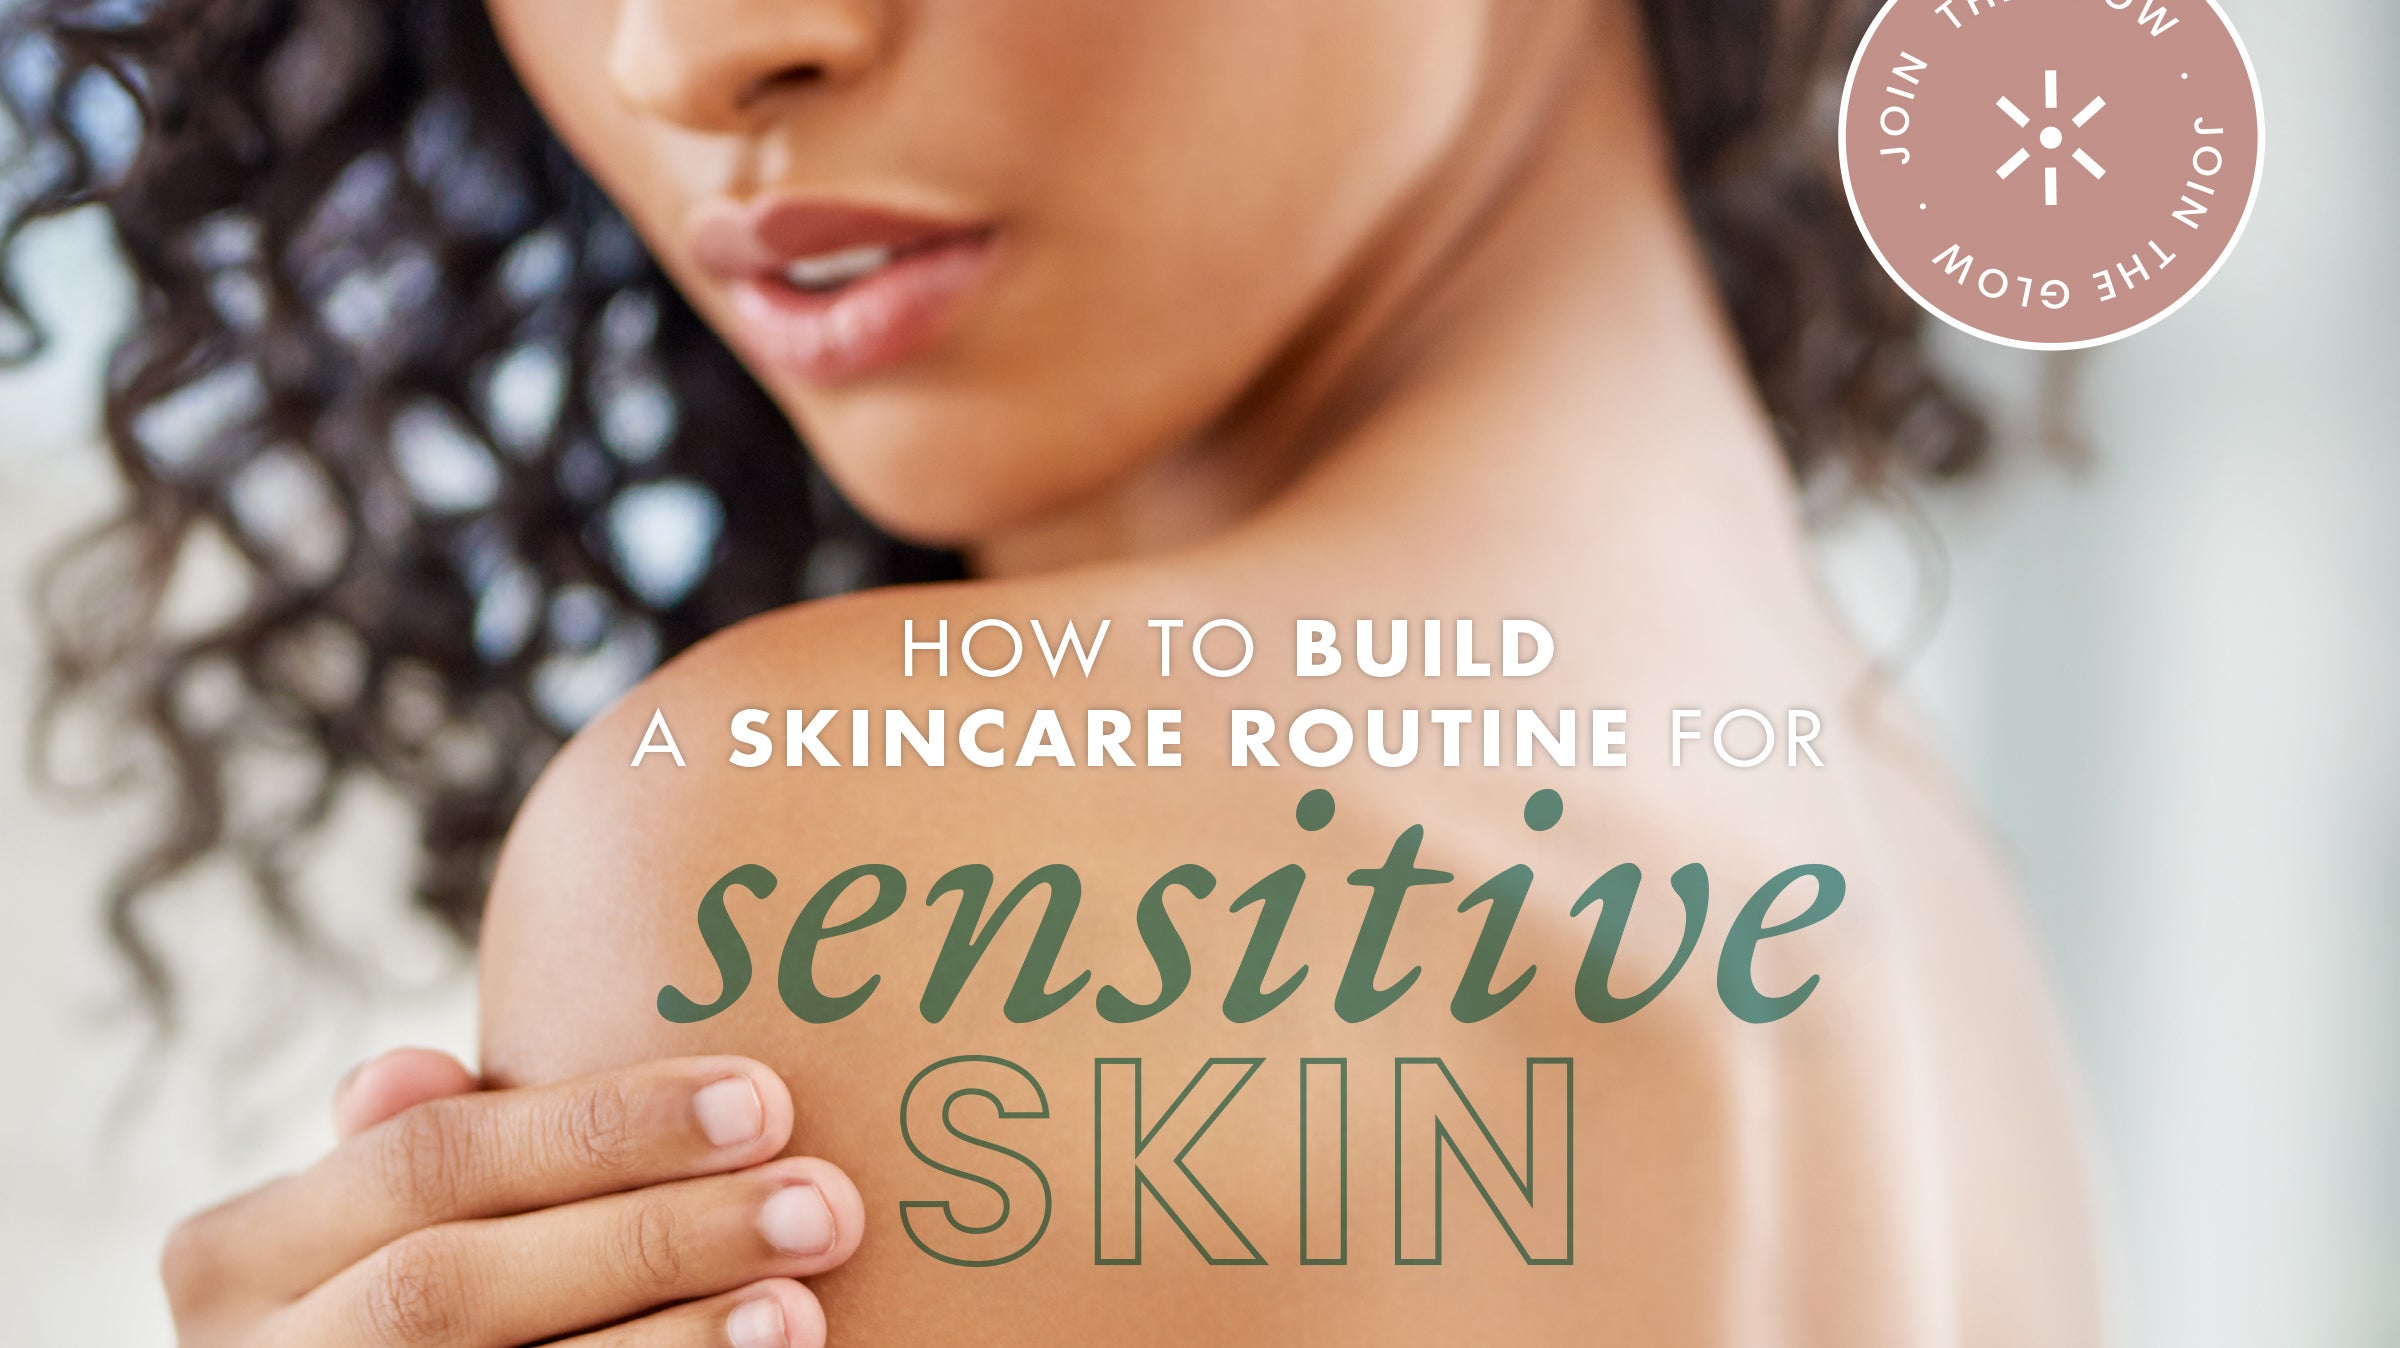 Tips on Building a Skincare Routine for Sensitive Skin